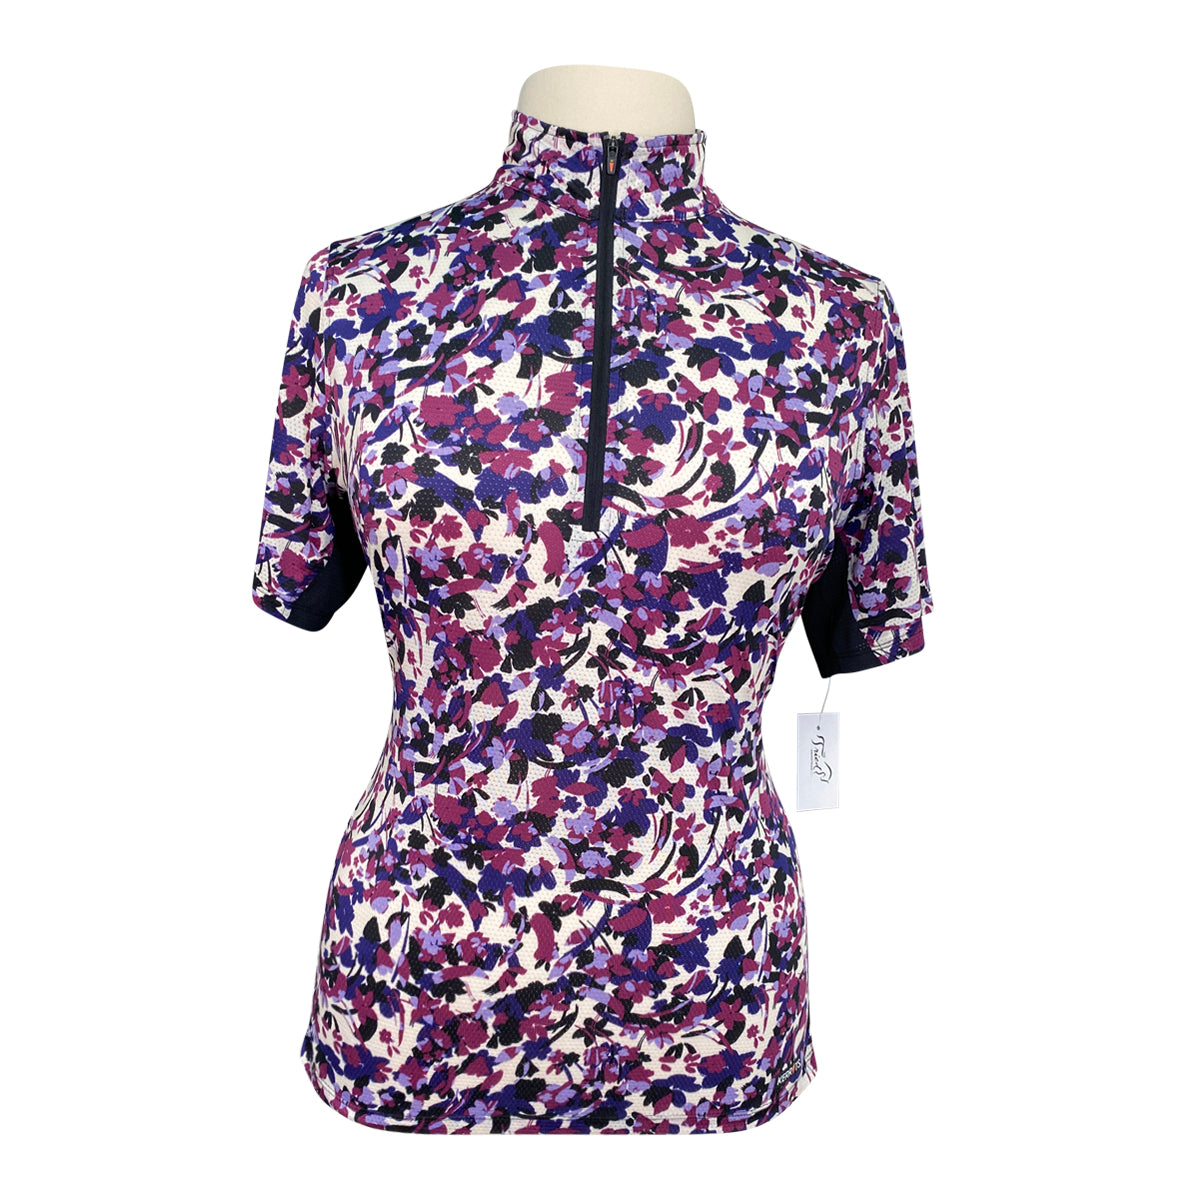 Kerrits Ice Fil Lite Short Sleeve Shirt in Violet Abstract Floral 